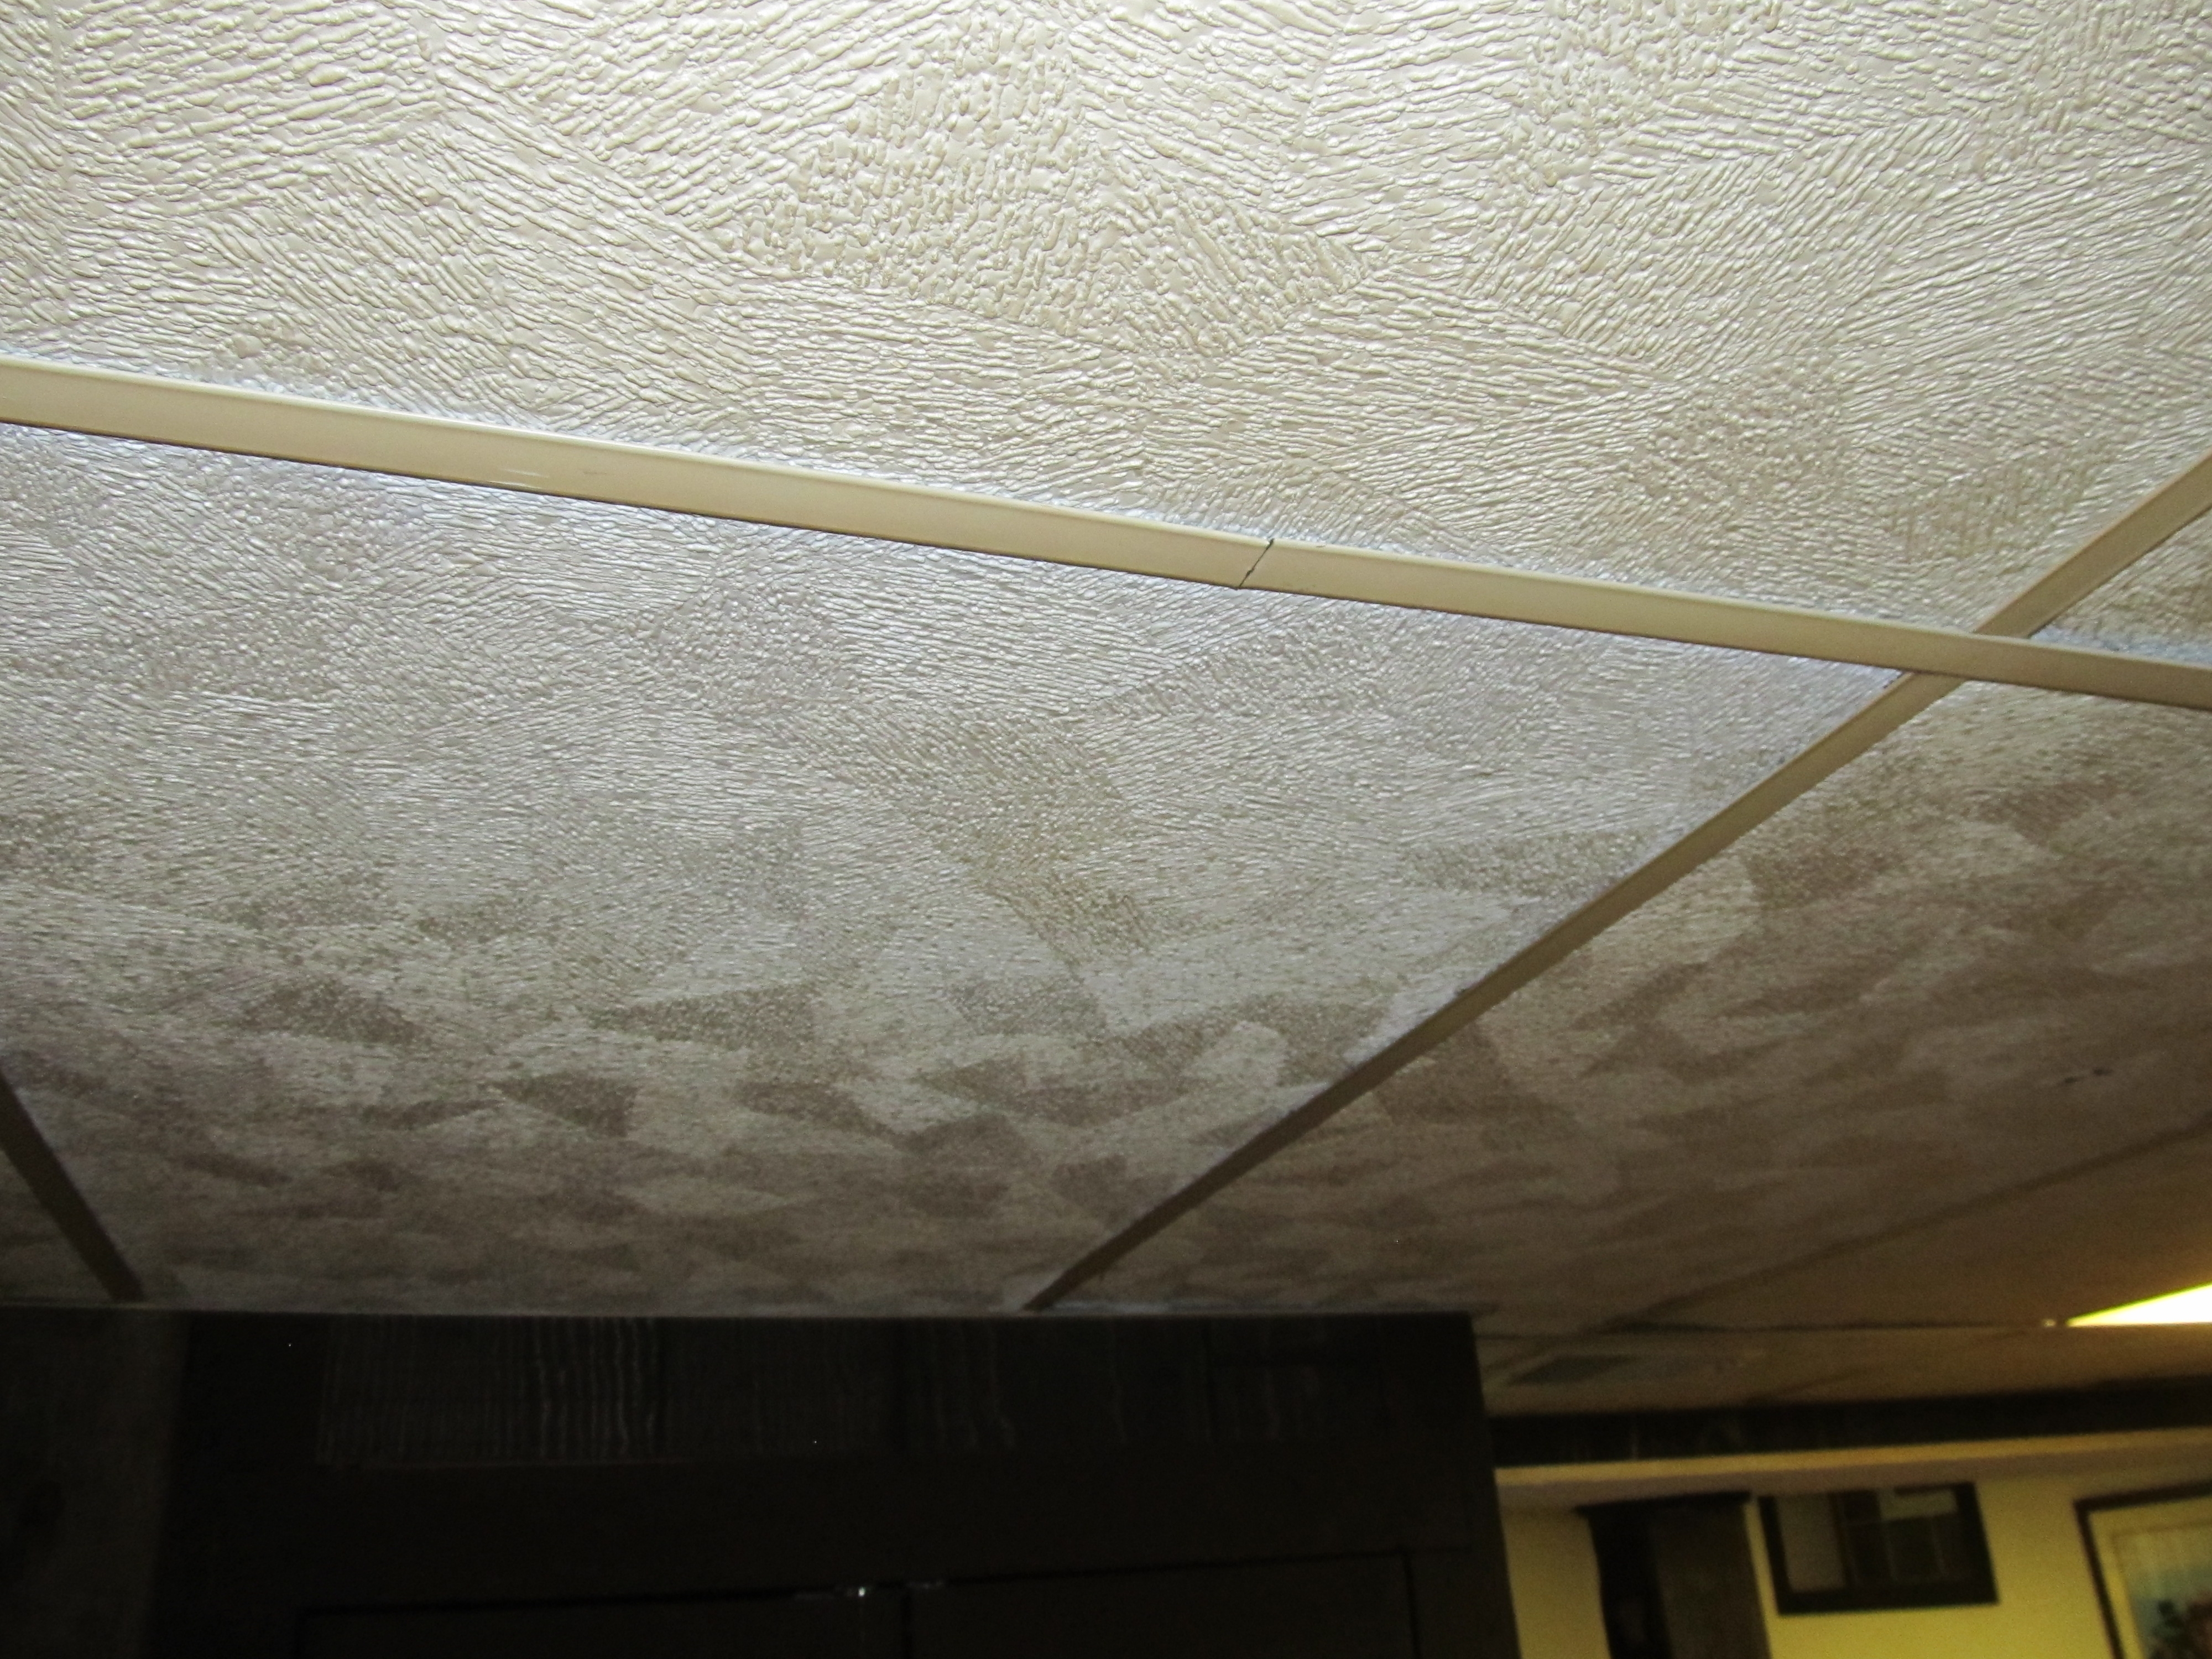 Fabric Covered Ceiling Tiles